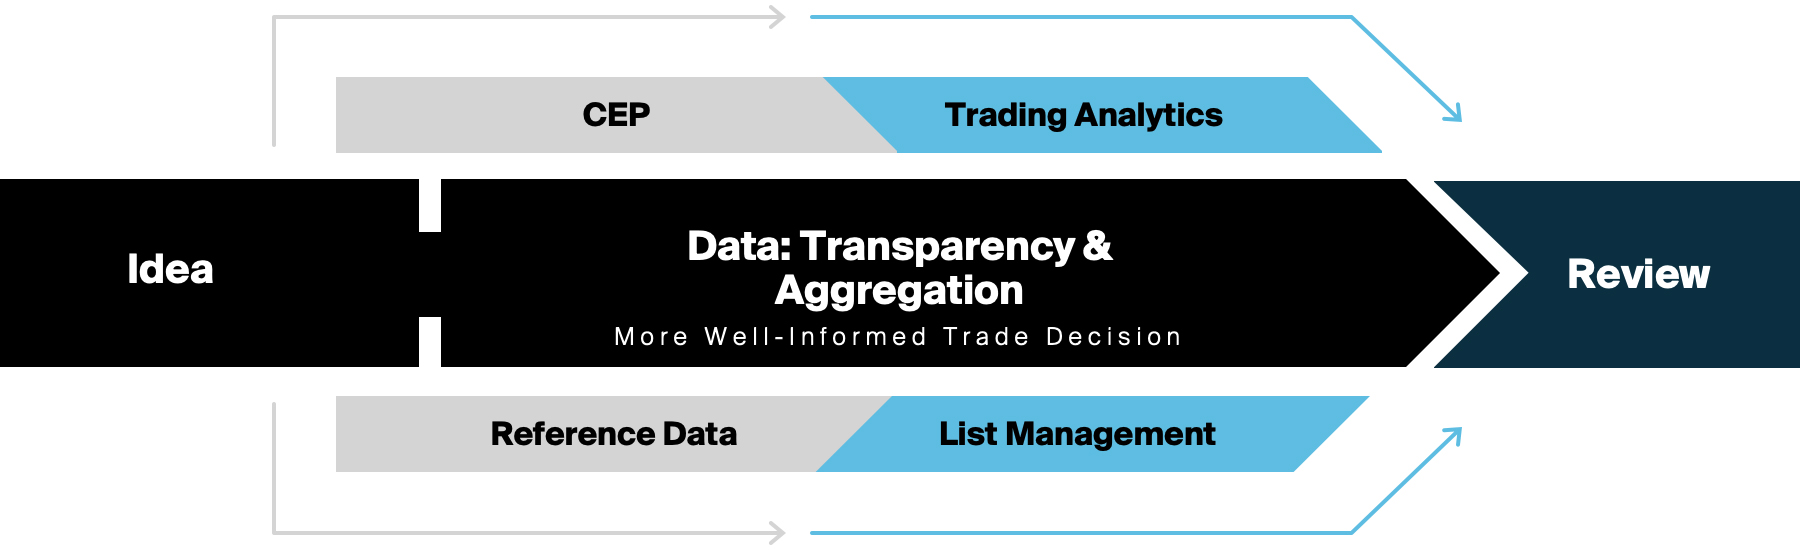 Data: Transparency & Aggregation